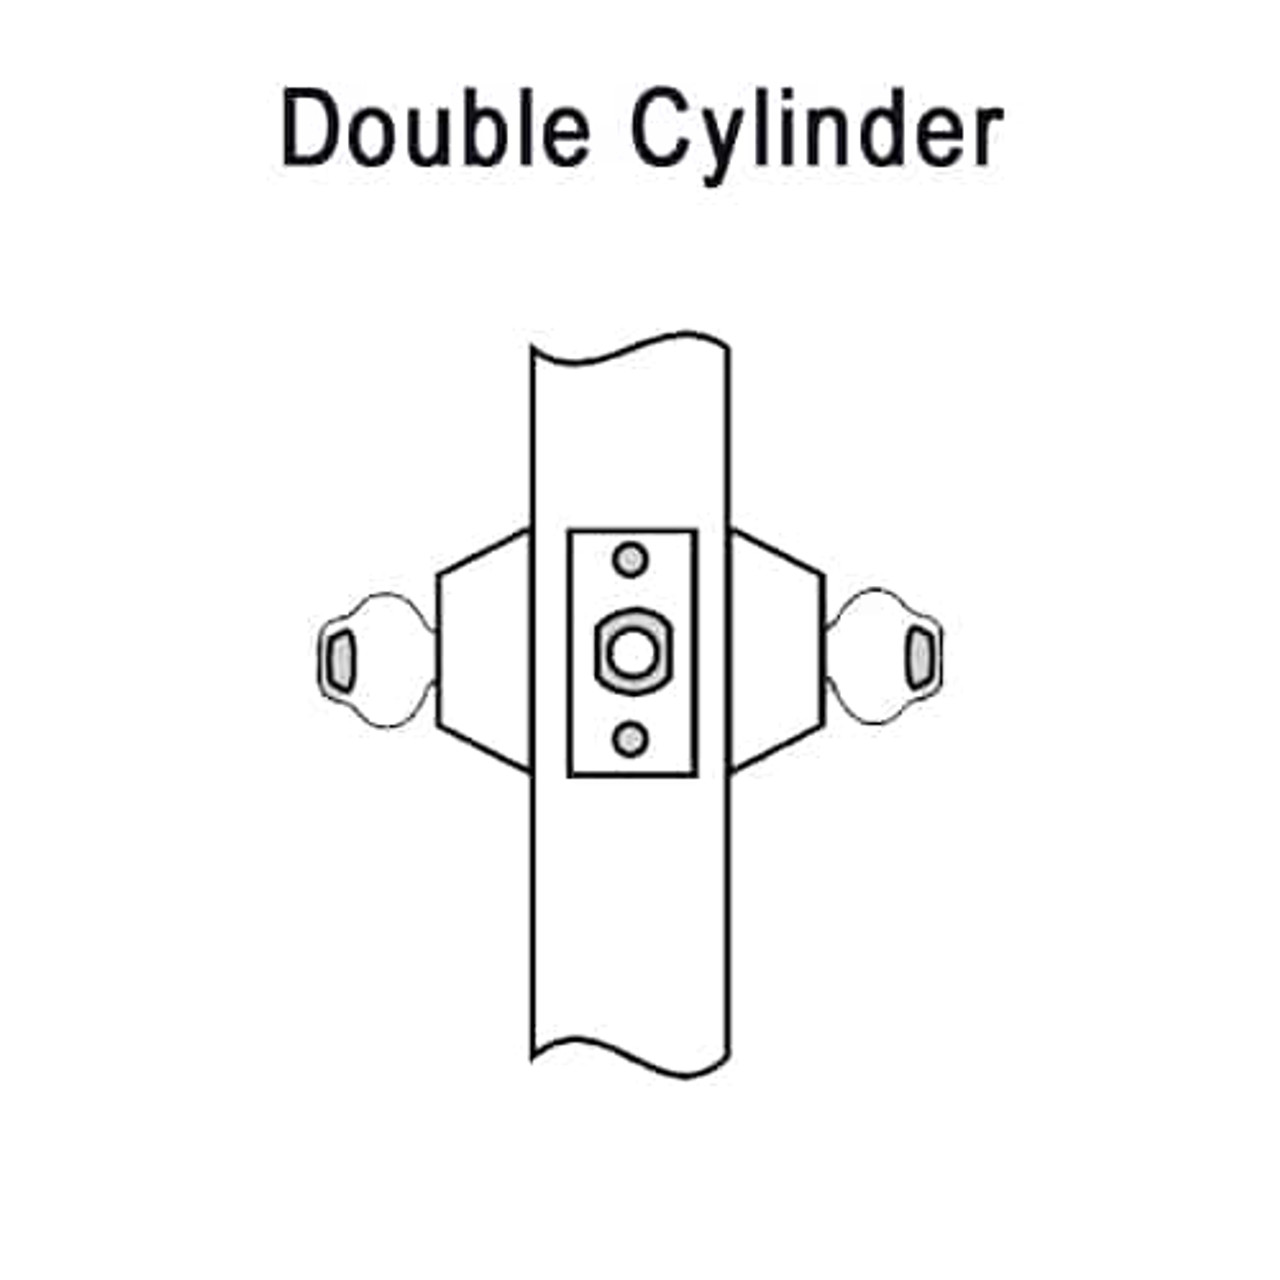 DL3012-625 Corbin DL3000 Series Cylindrical Deadlocks with Double Cylinder in Bright Chrome